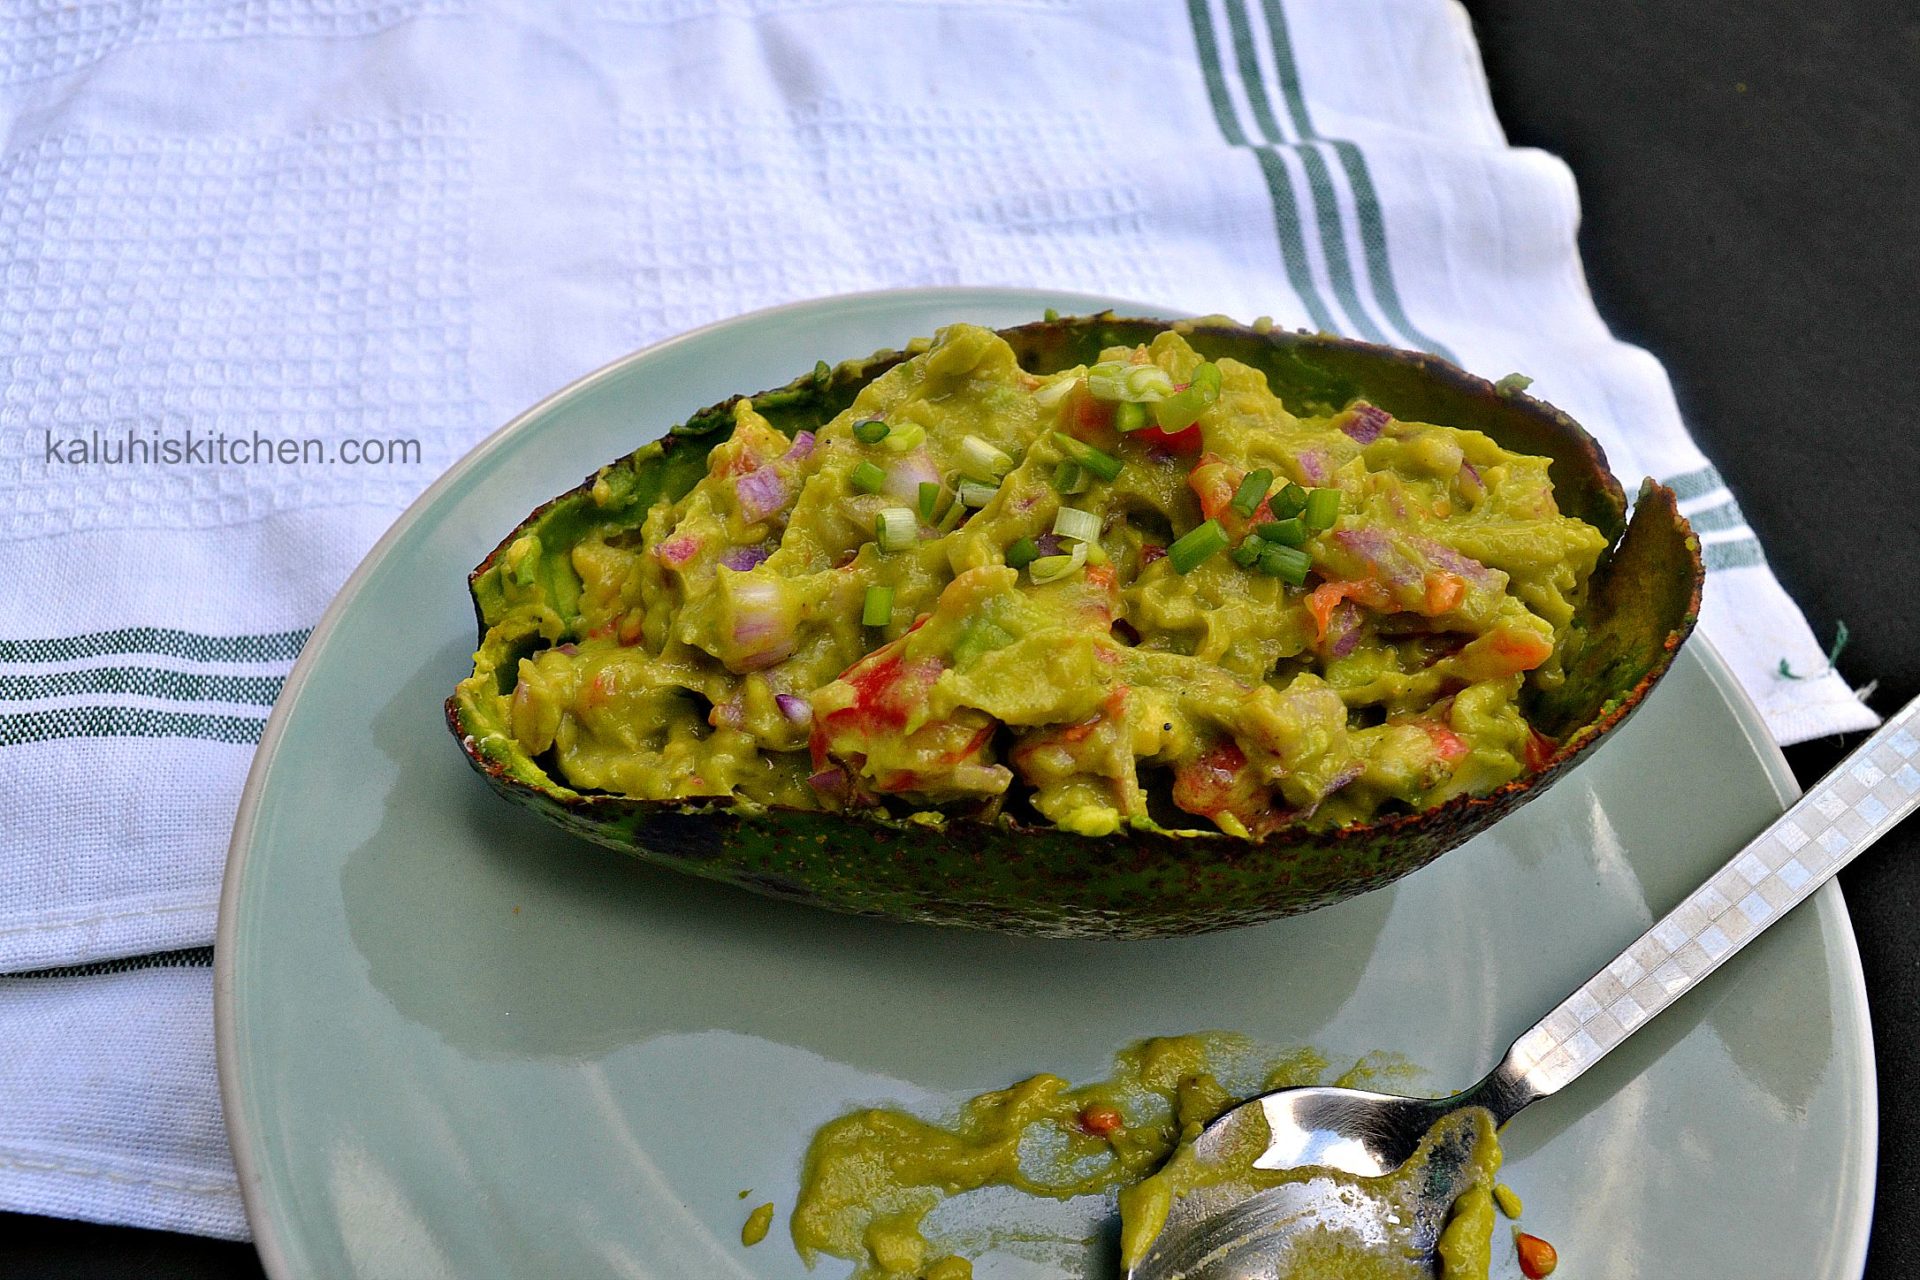 www.kaluhiskitchen.com presents the best guacamole recipe with lime, garlic, and red onion